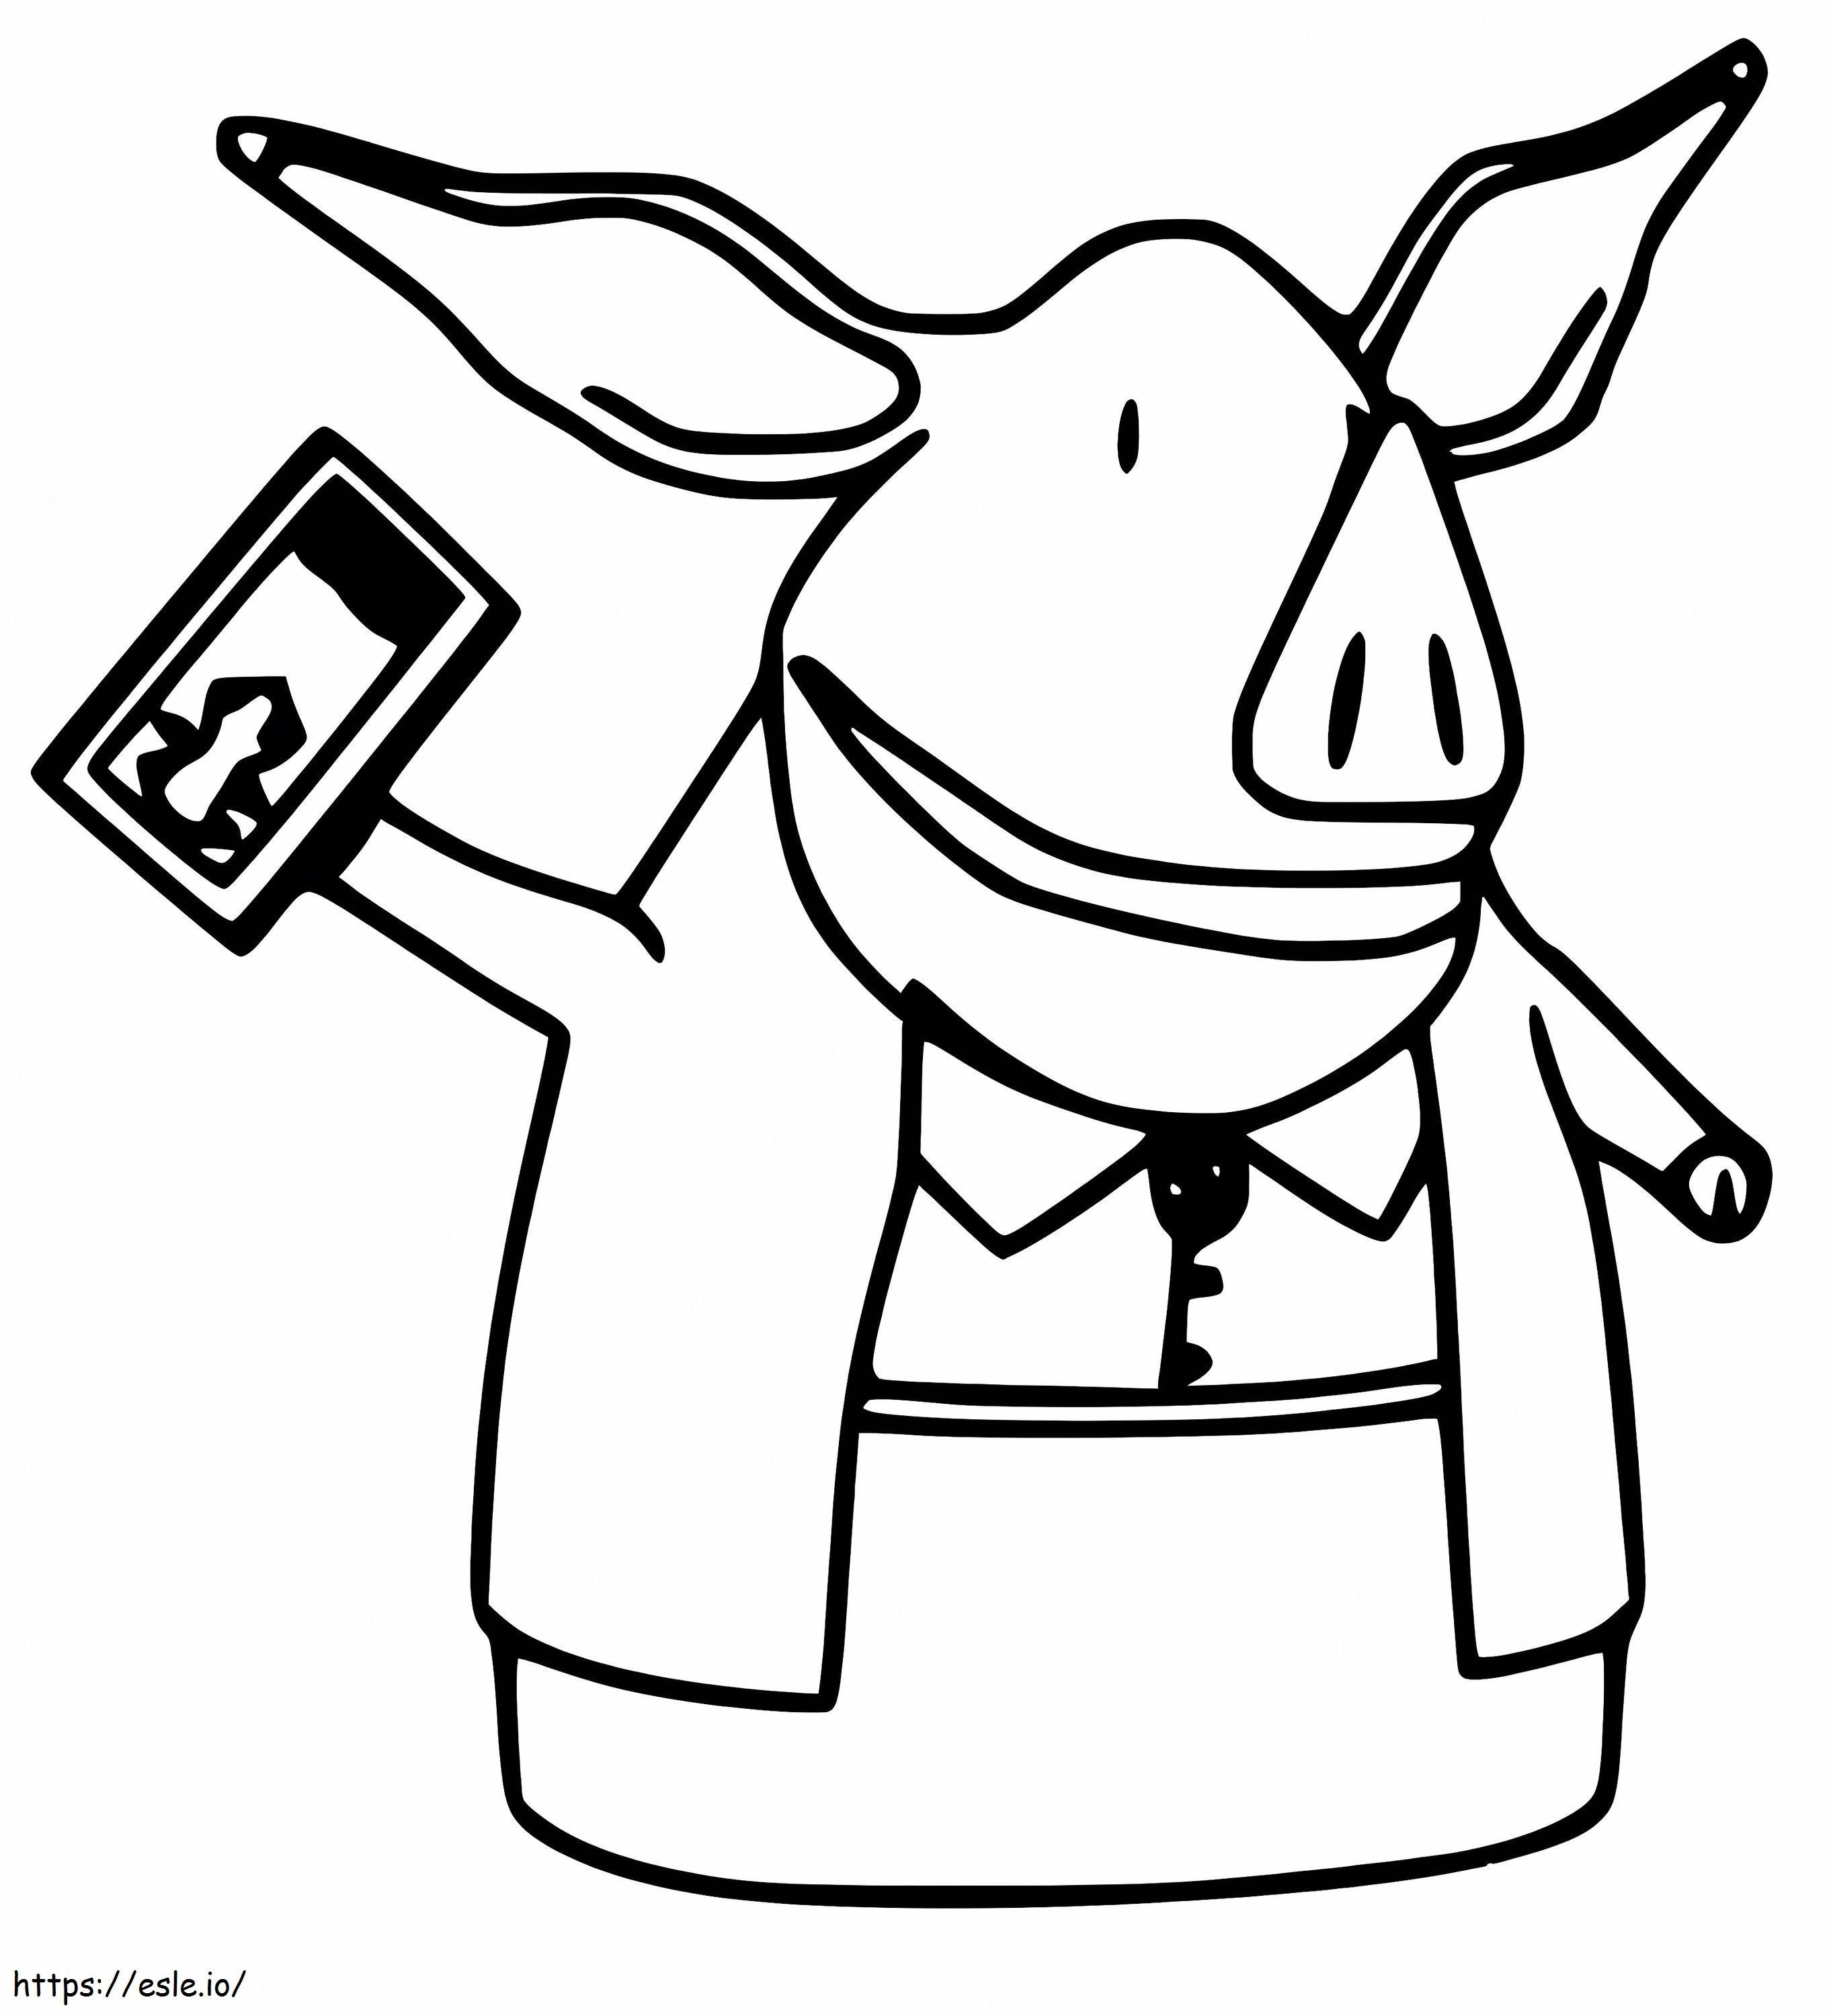 Mrs Hoggenmuller Pig coloring page